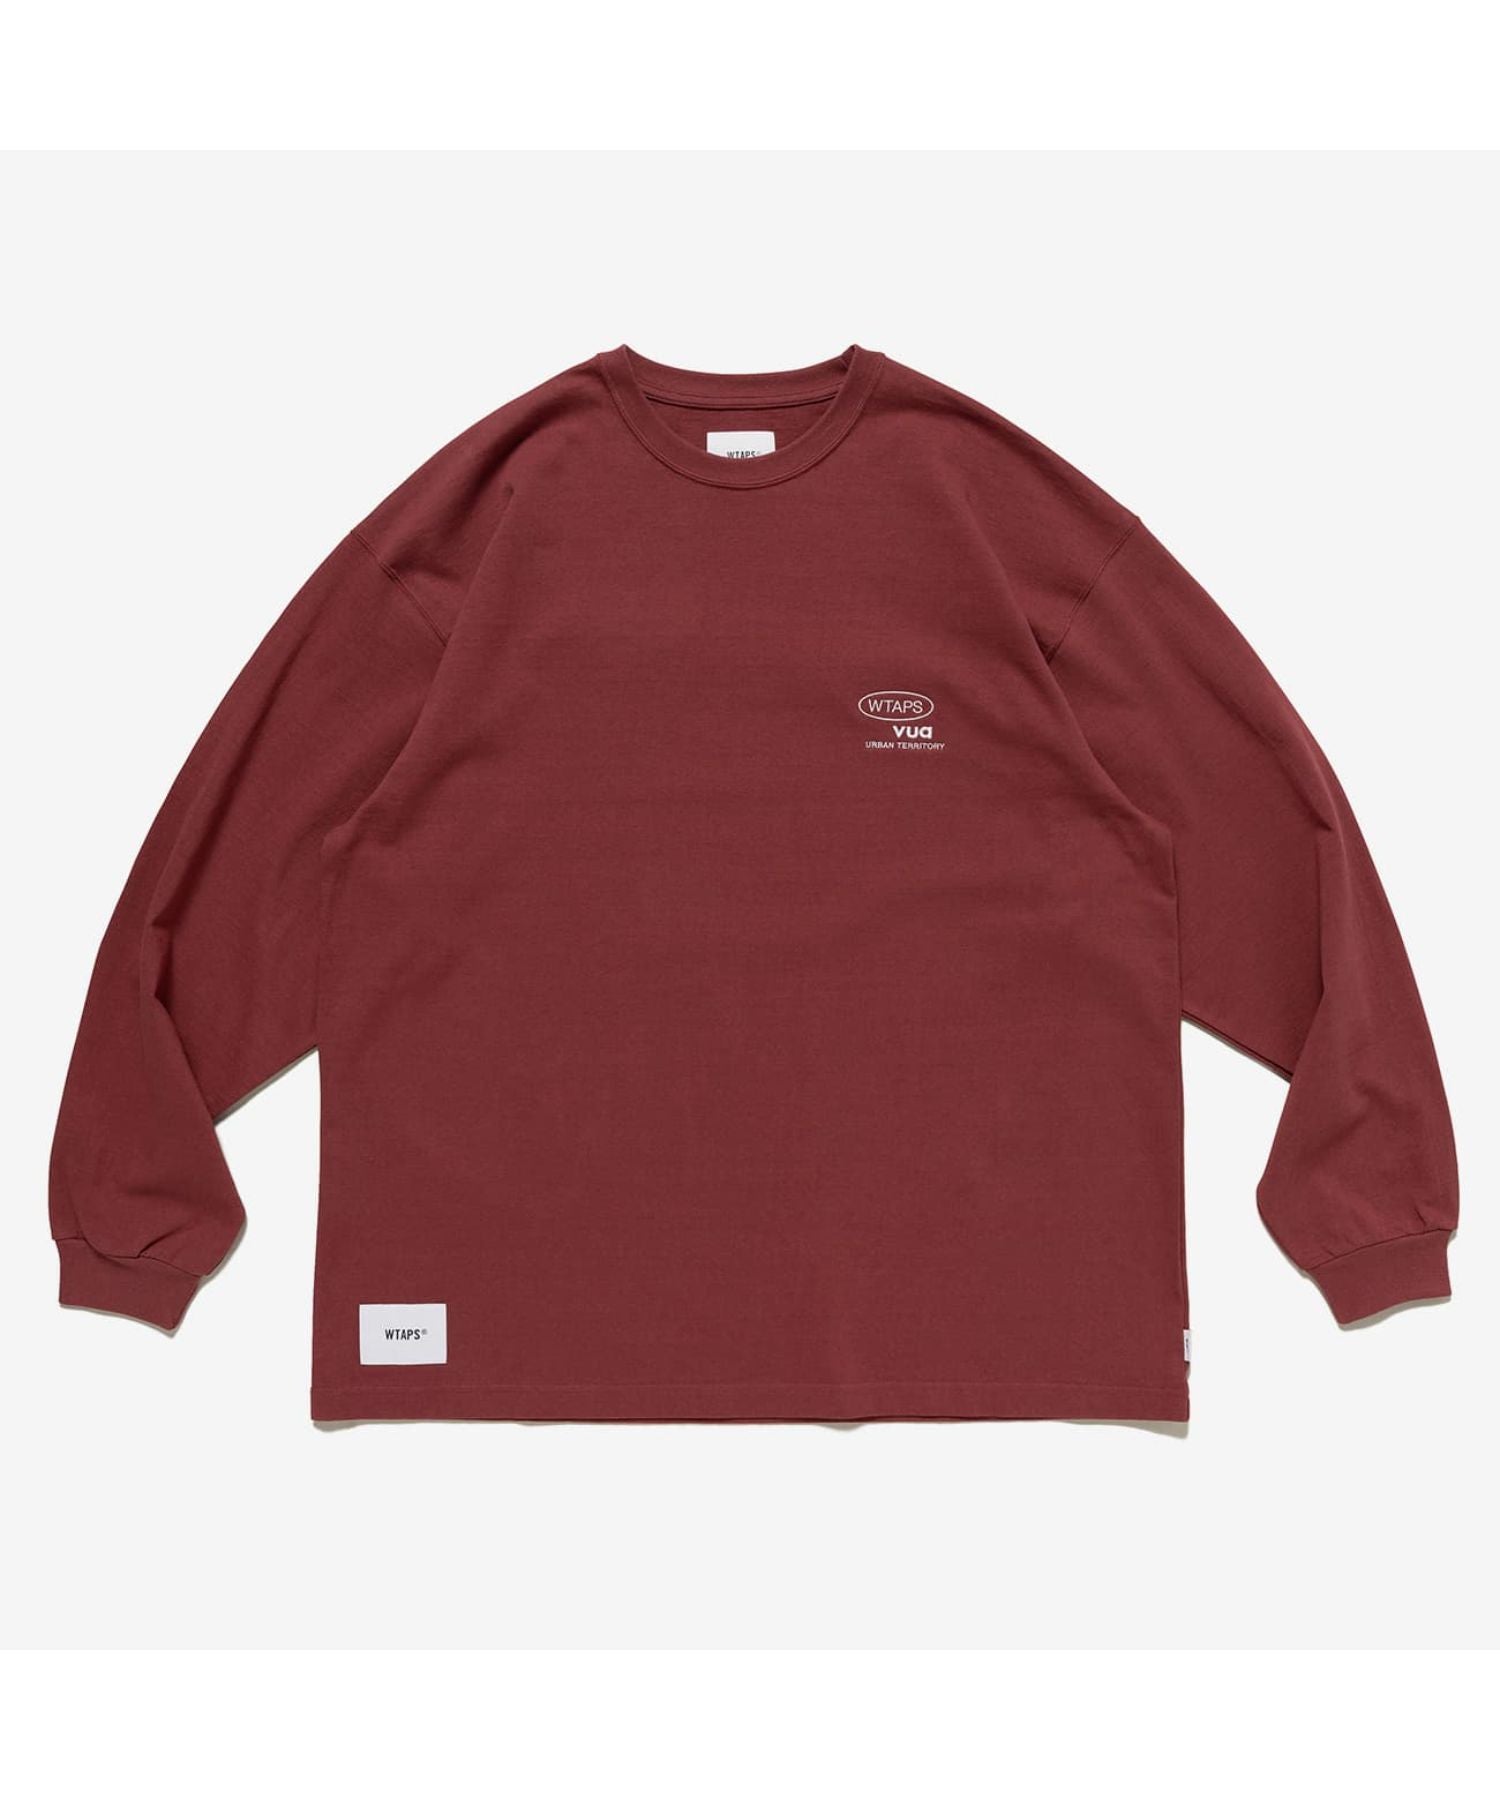 AII 01 / LS / COTTON. PROTECT - WTAPS (ダブルタップス) - tops